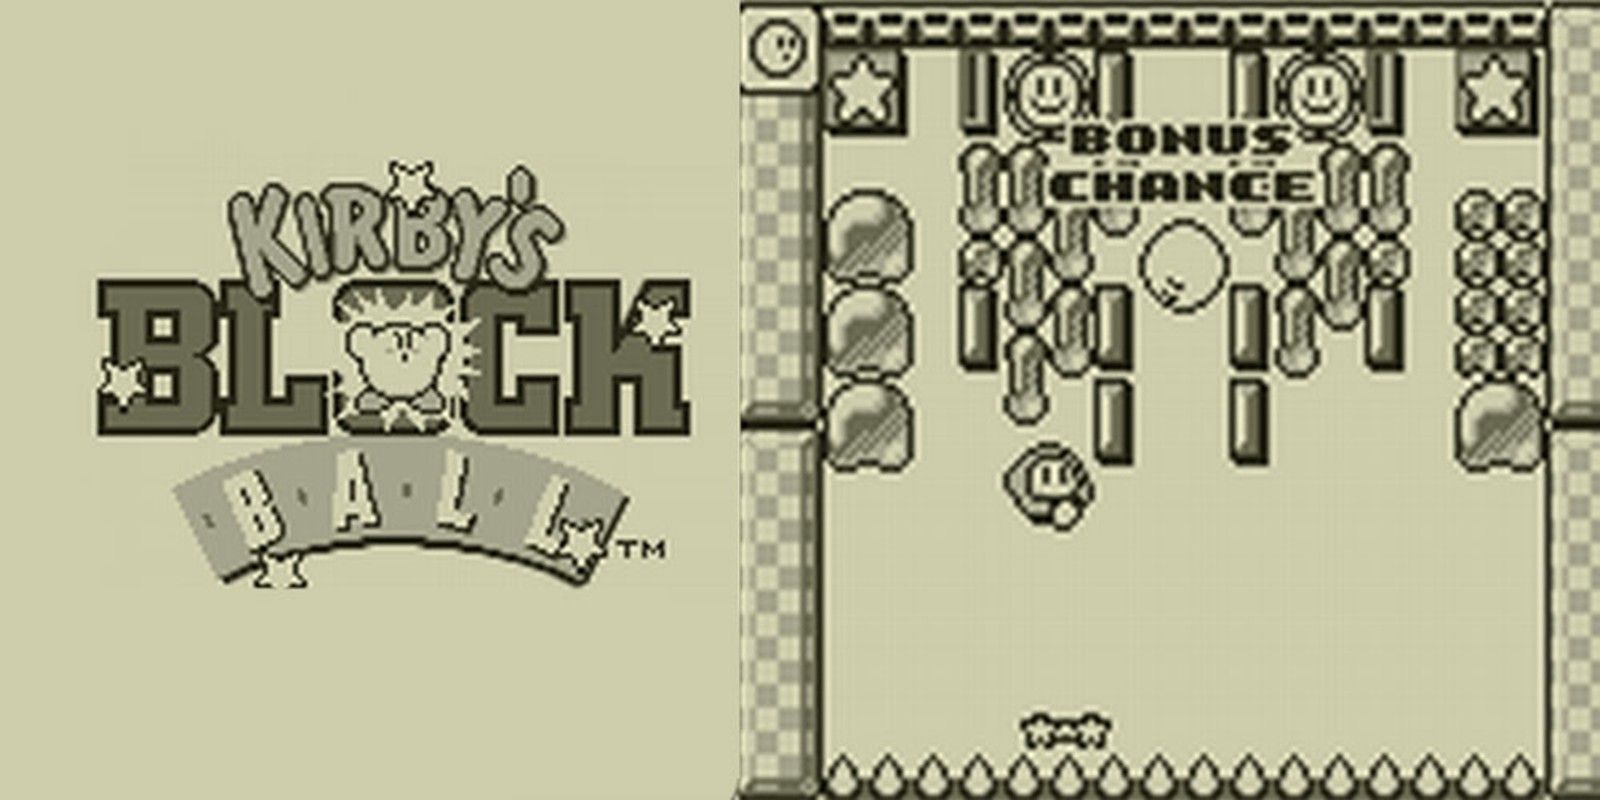 Kirby's Block Ball image showing title and gameplay